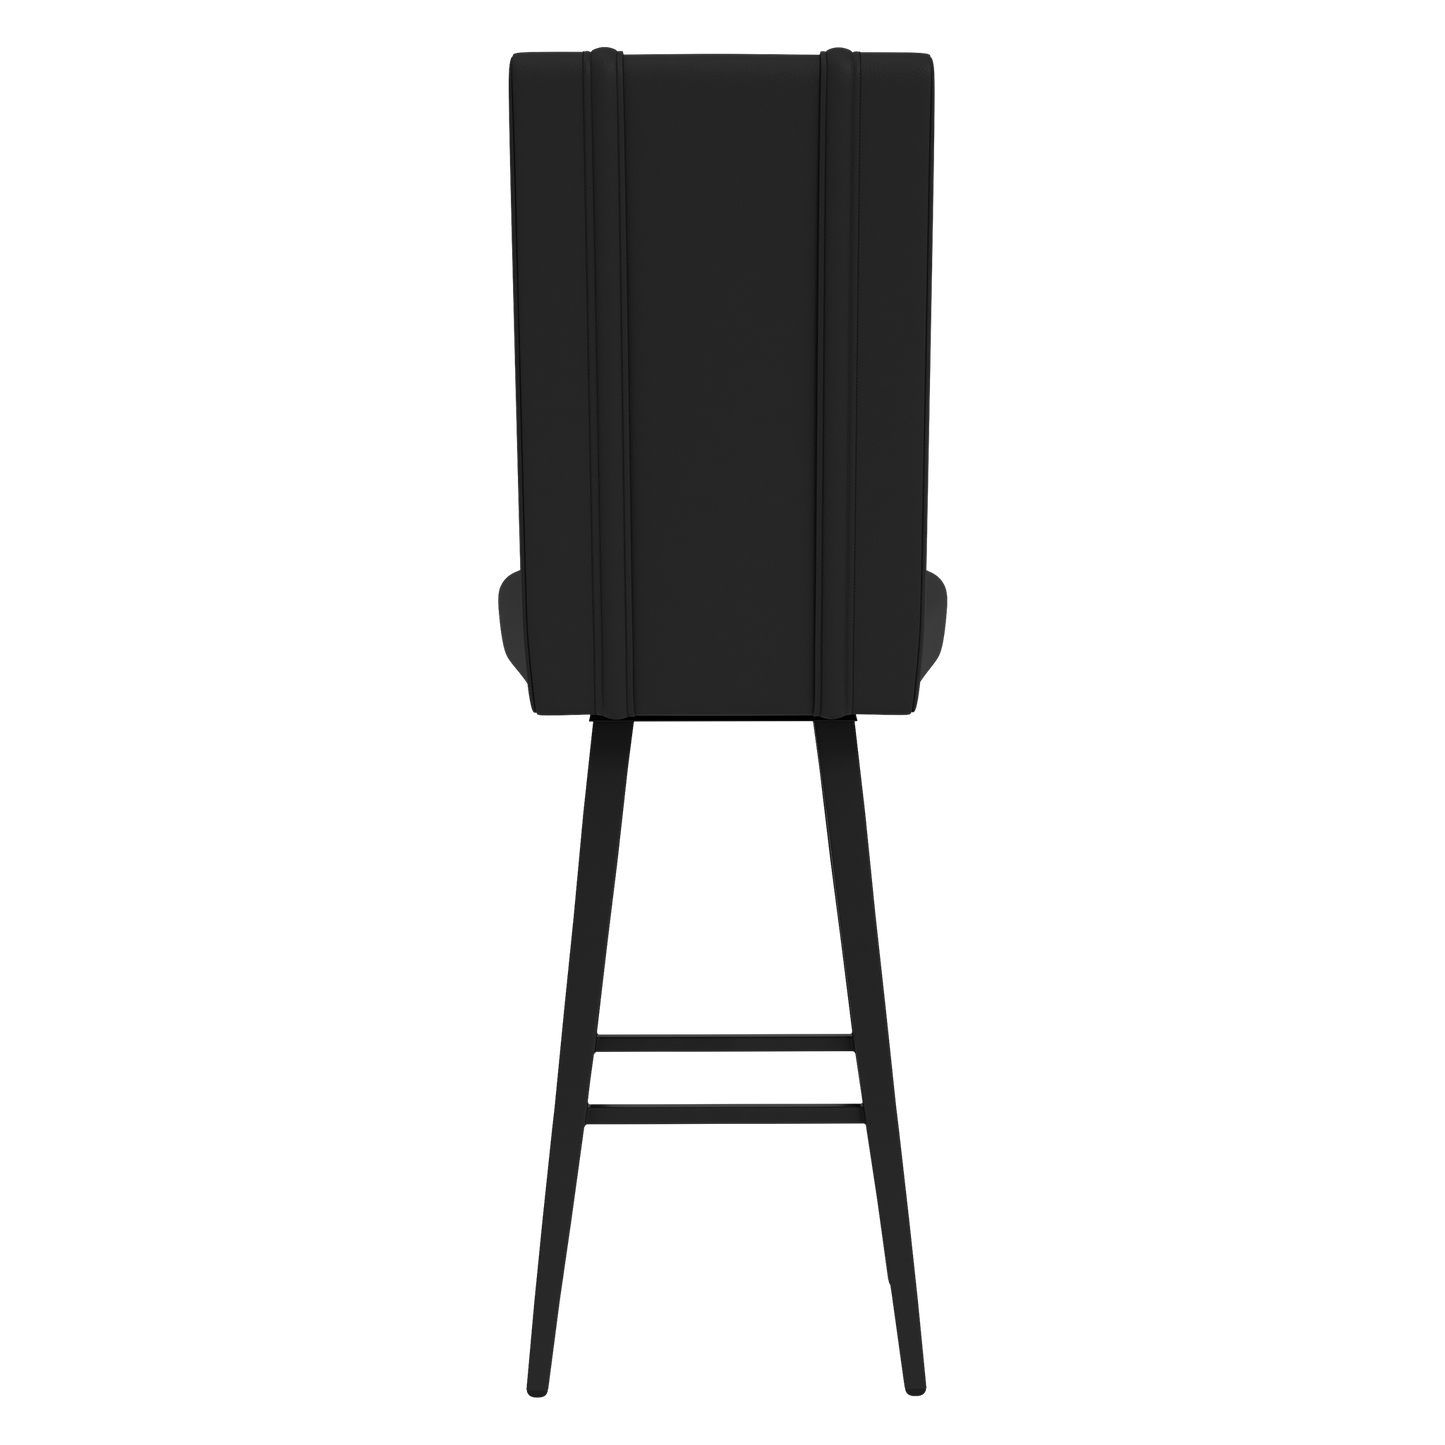 Swivel Bar Stool 2000 with  Los Angeles Chargers Helmet Logo